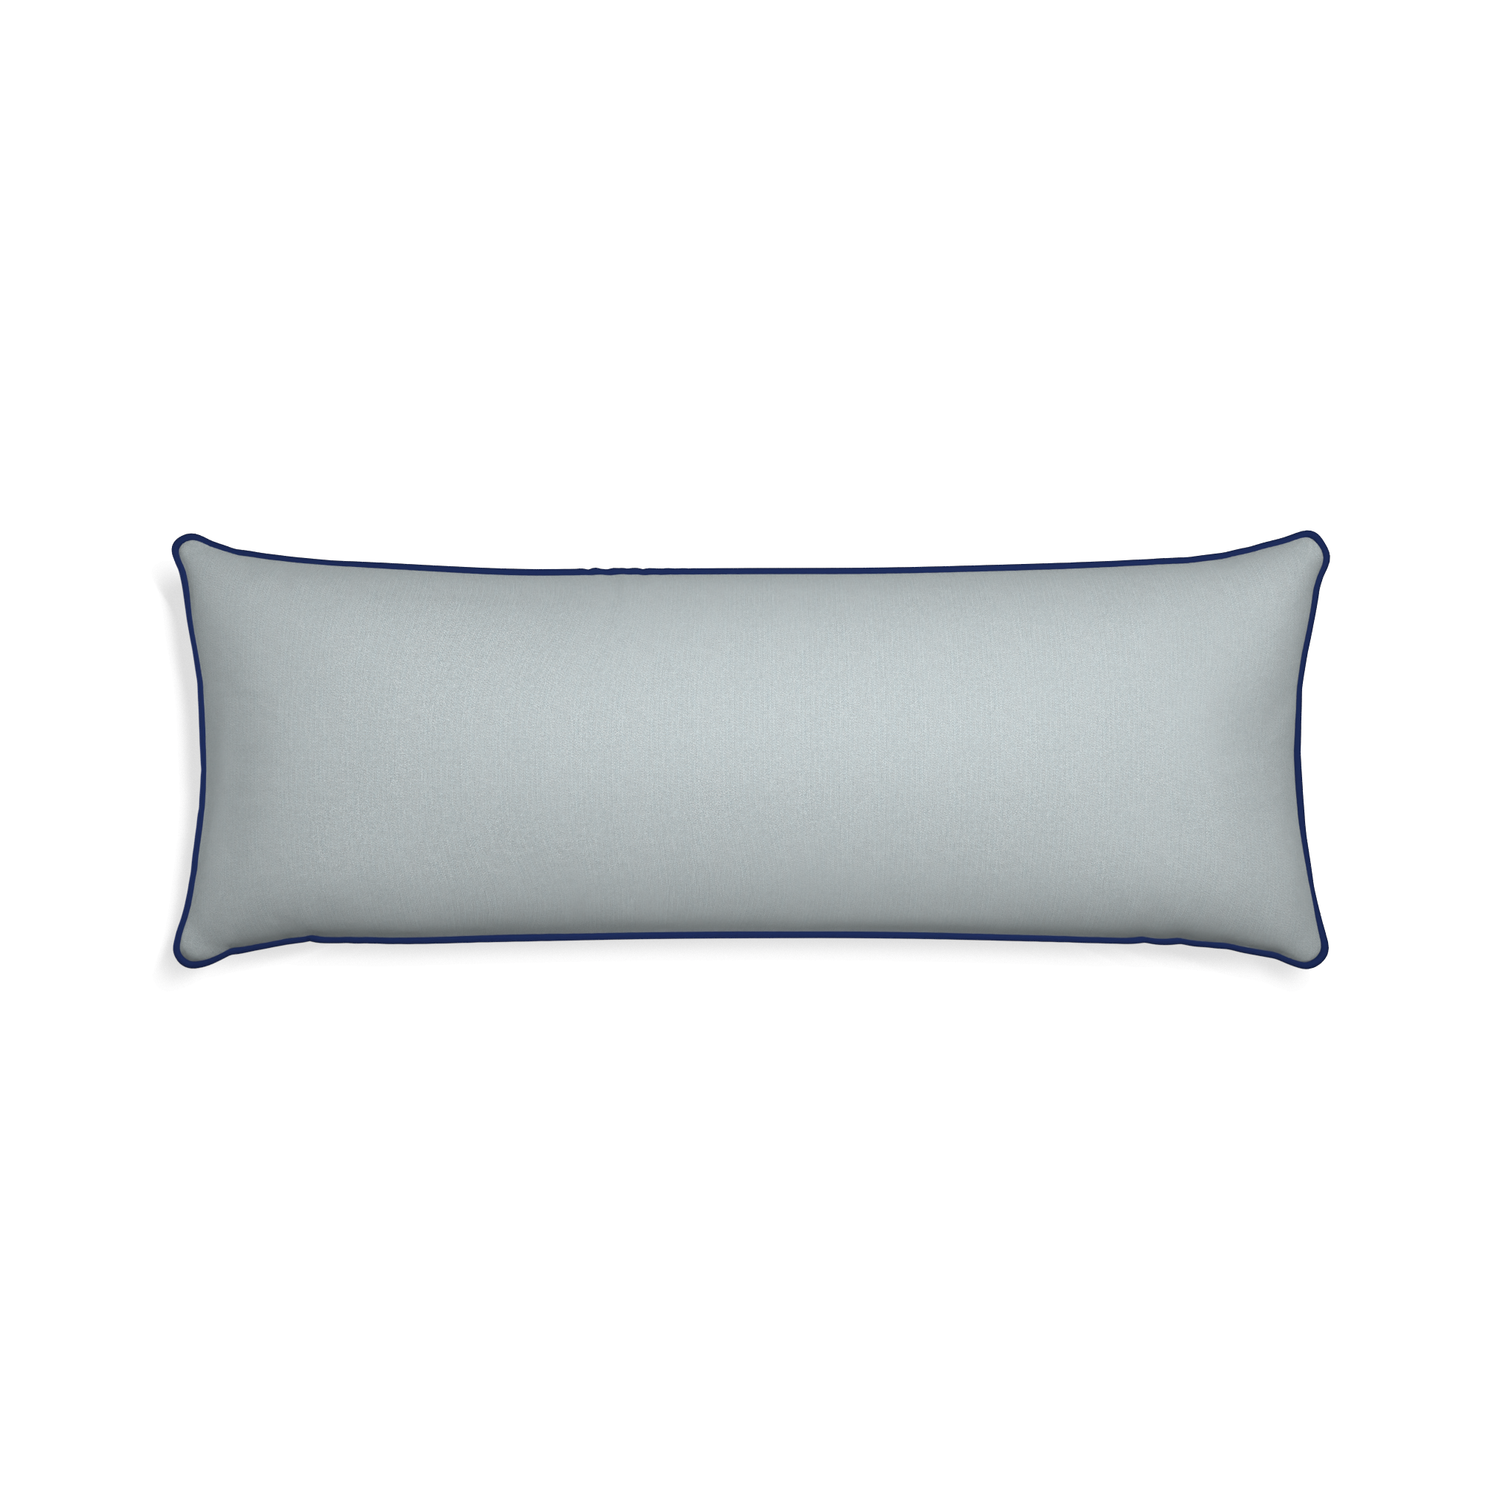 Xl-lumbar sea custom grey bluepillow with midnight piping on white background